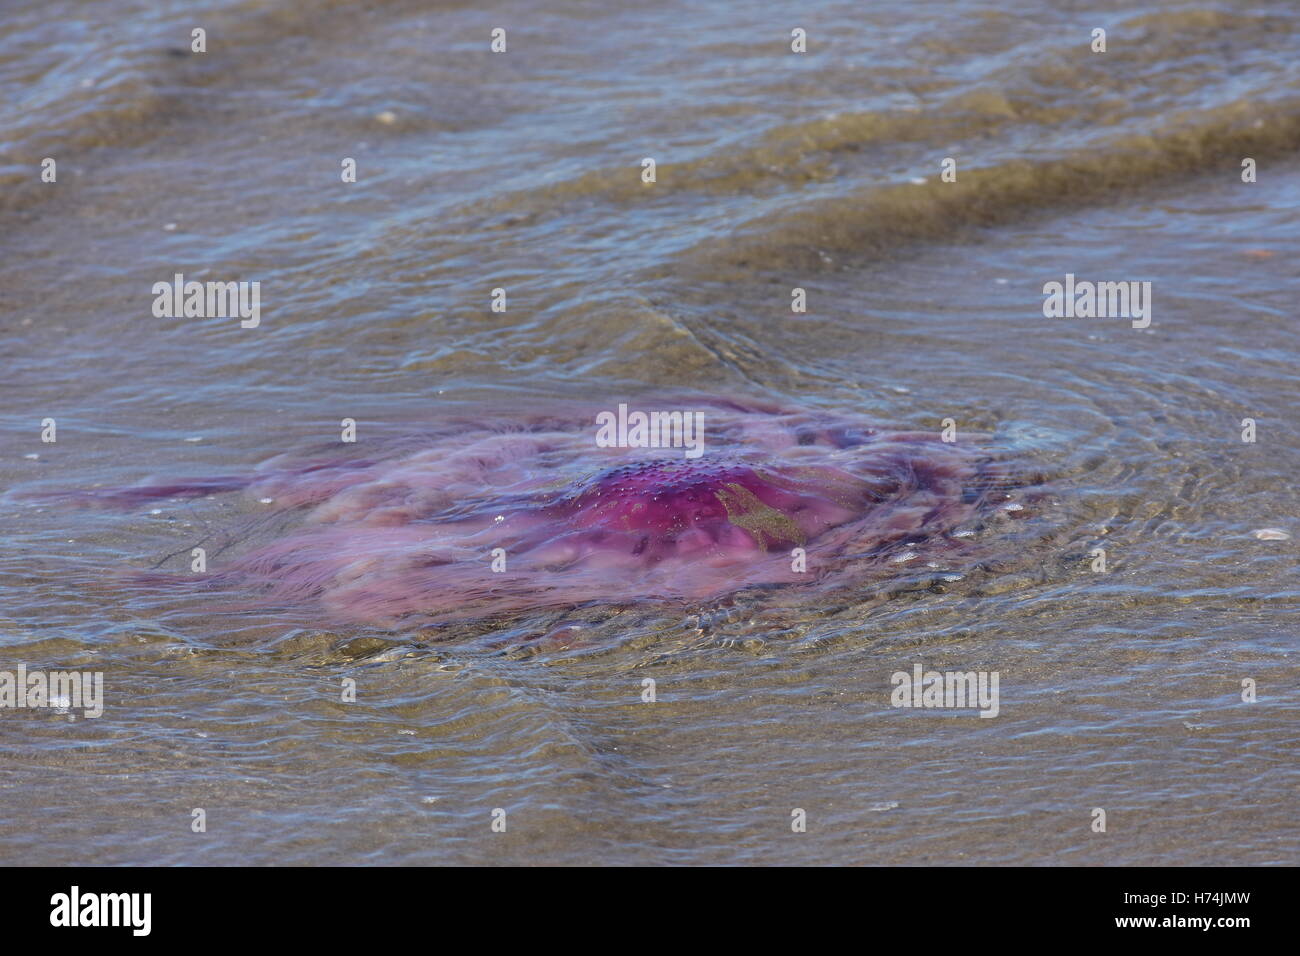 Big jellyfish stranded in shallow waves. Stock Photo